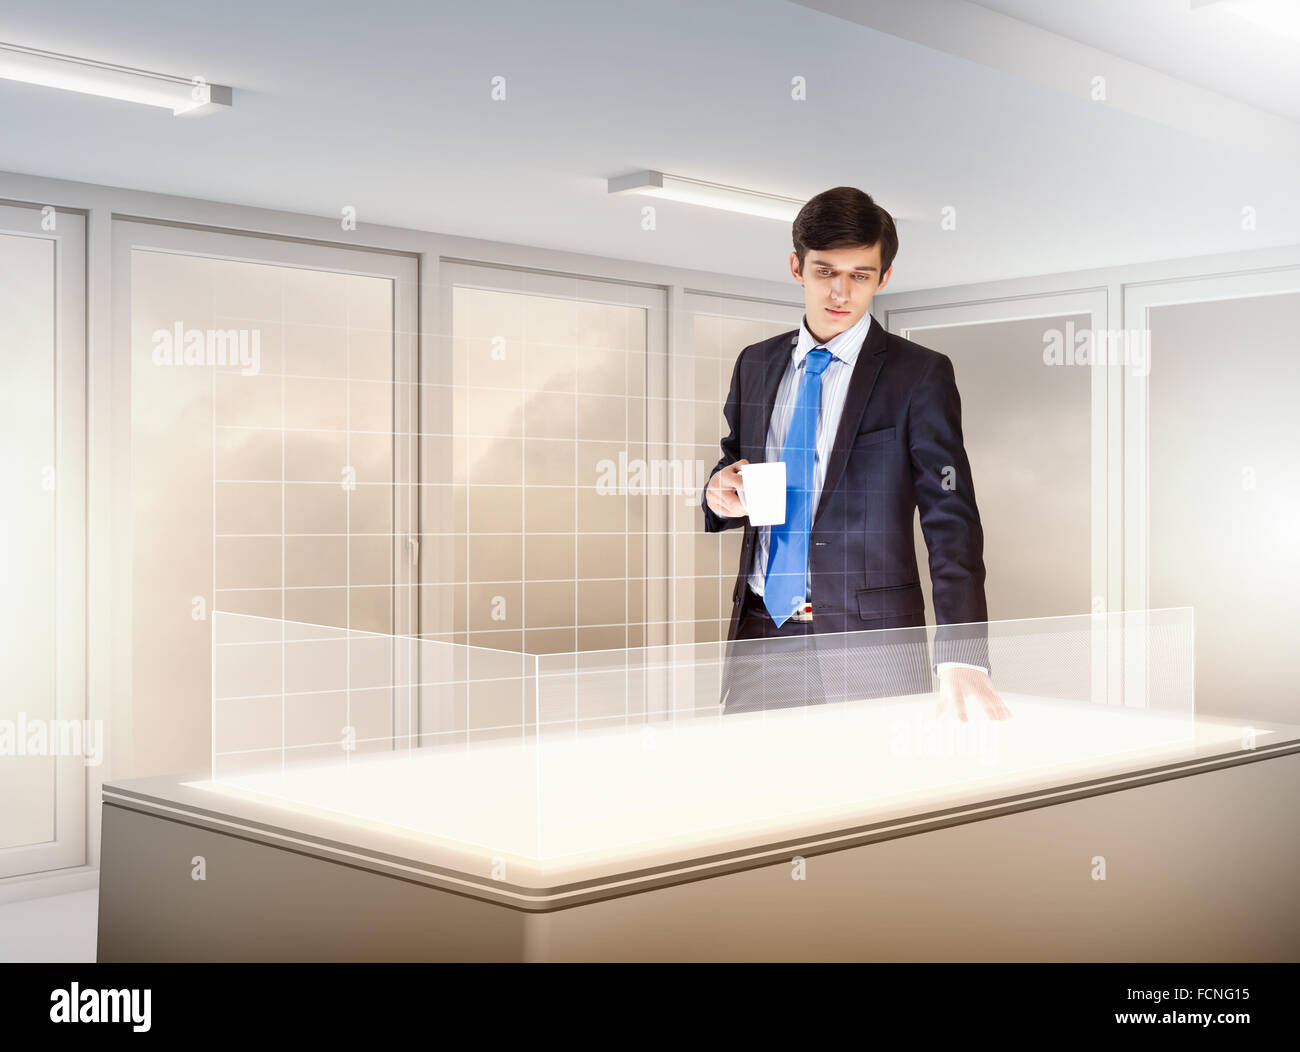 young businessman standing in background of high-tech image Stock Photo